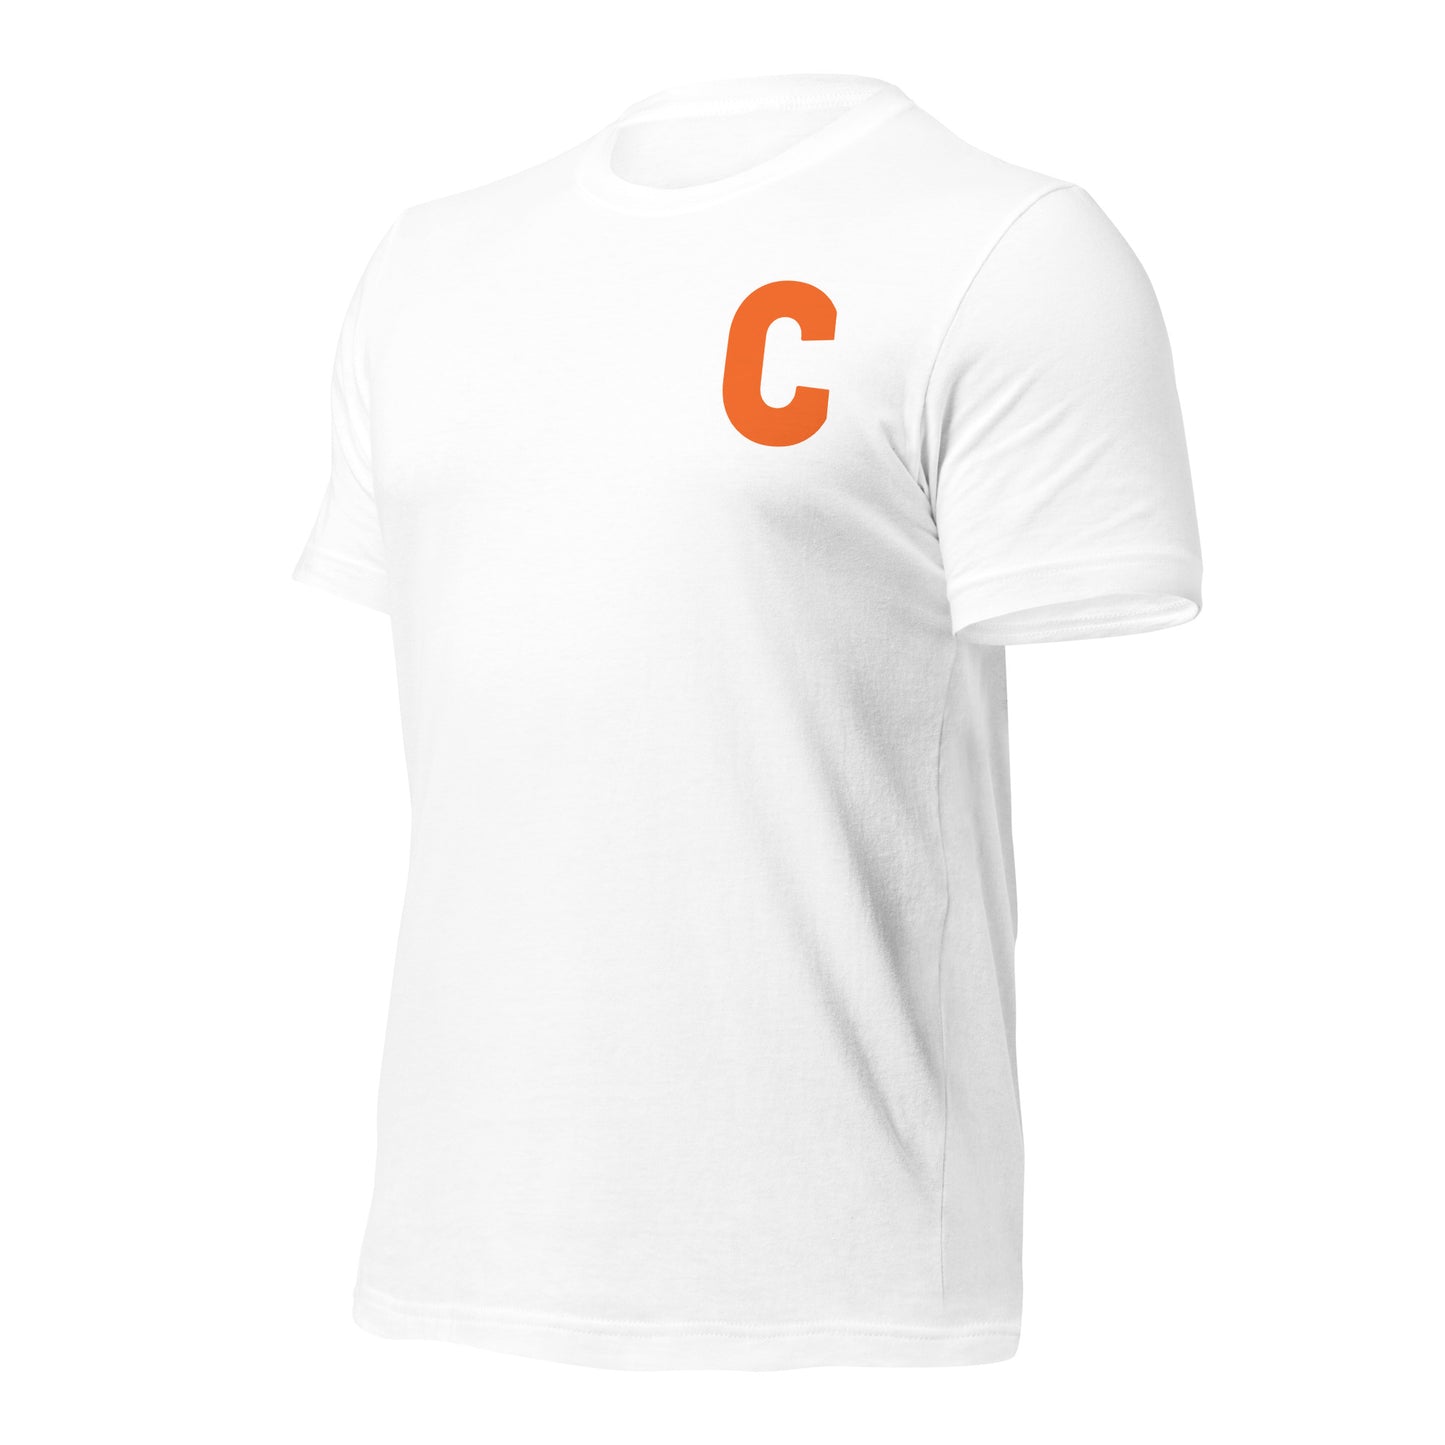 A Day at Shea "C" Adult Unisex T-Shirt